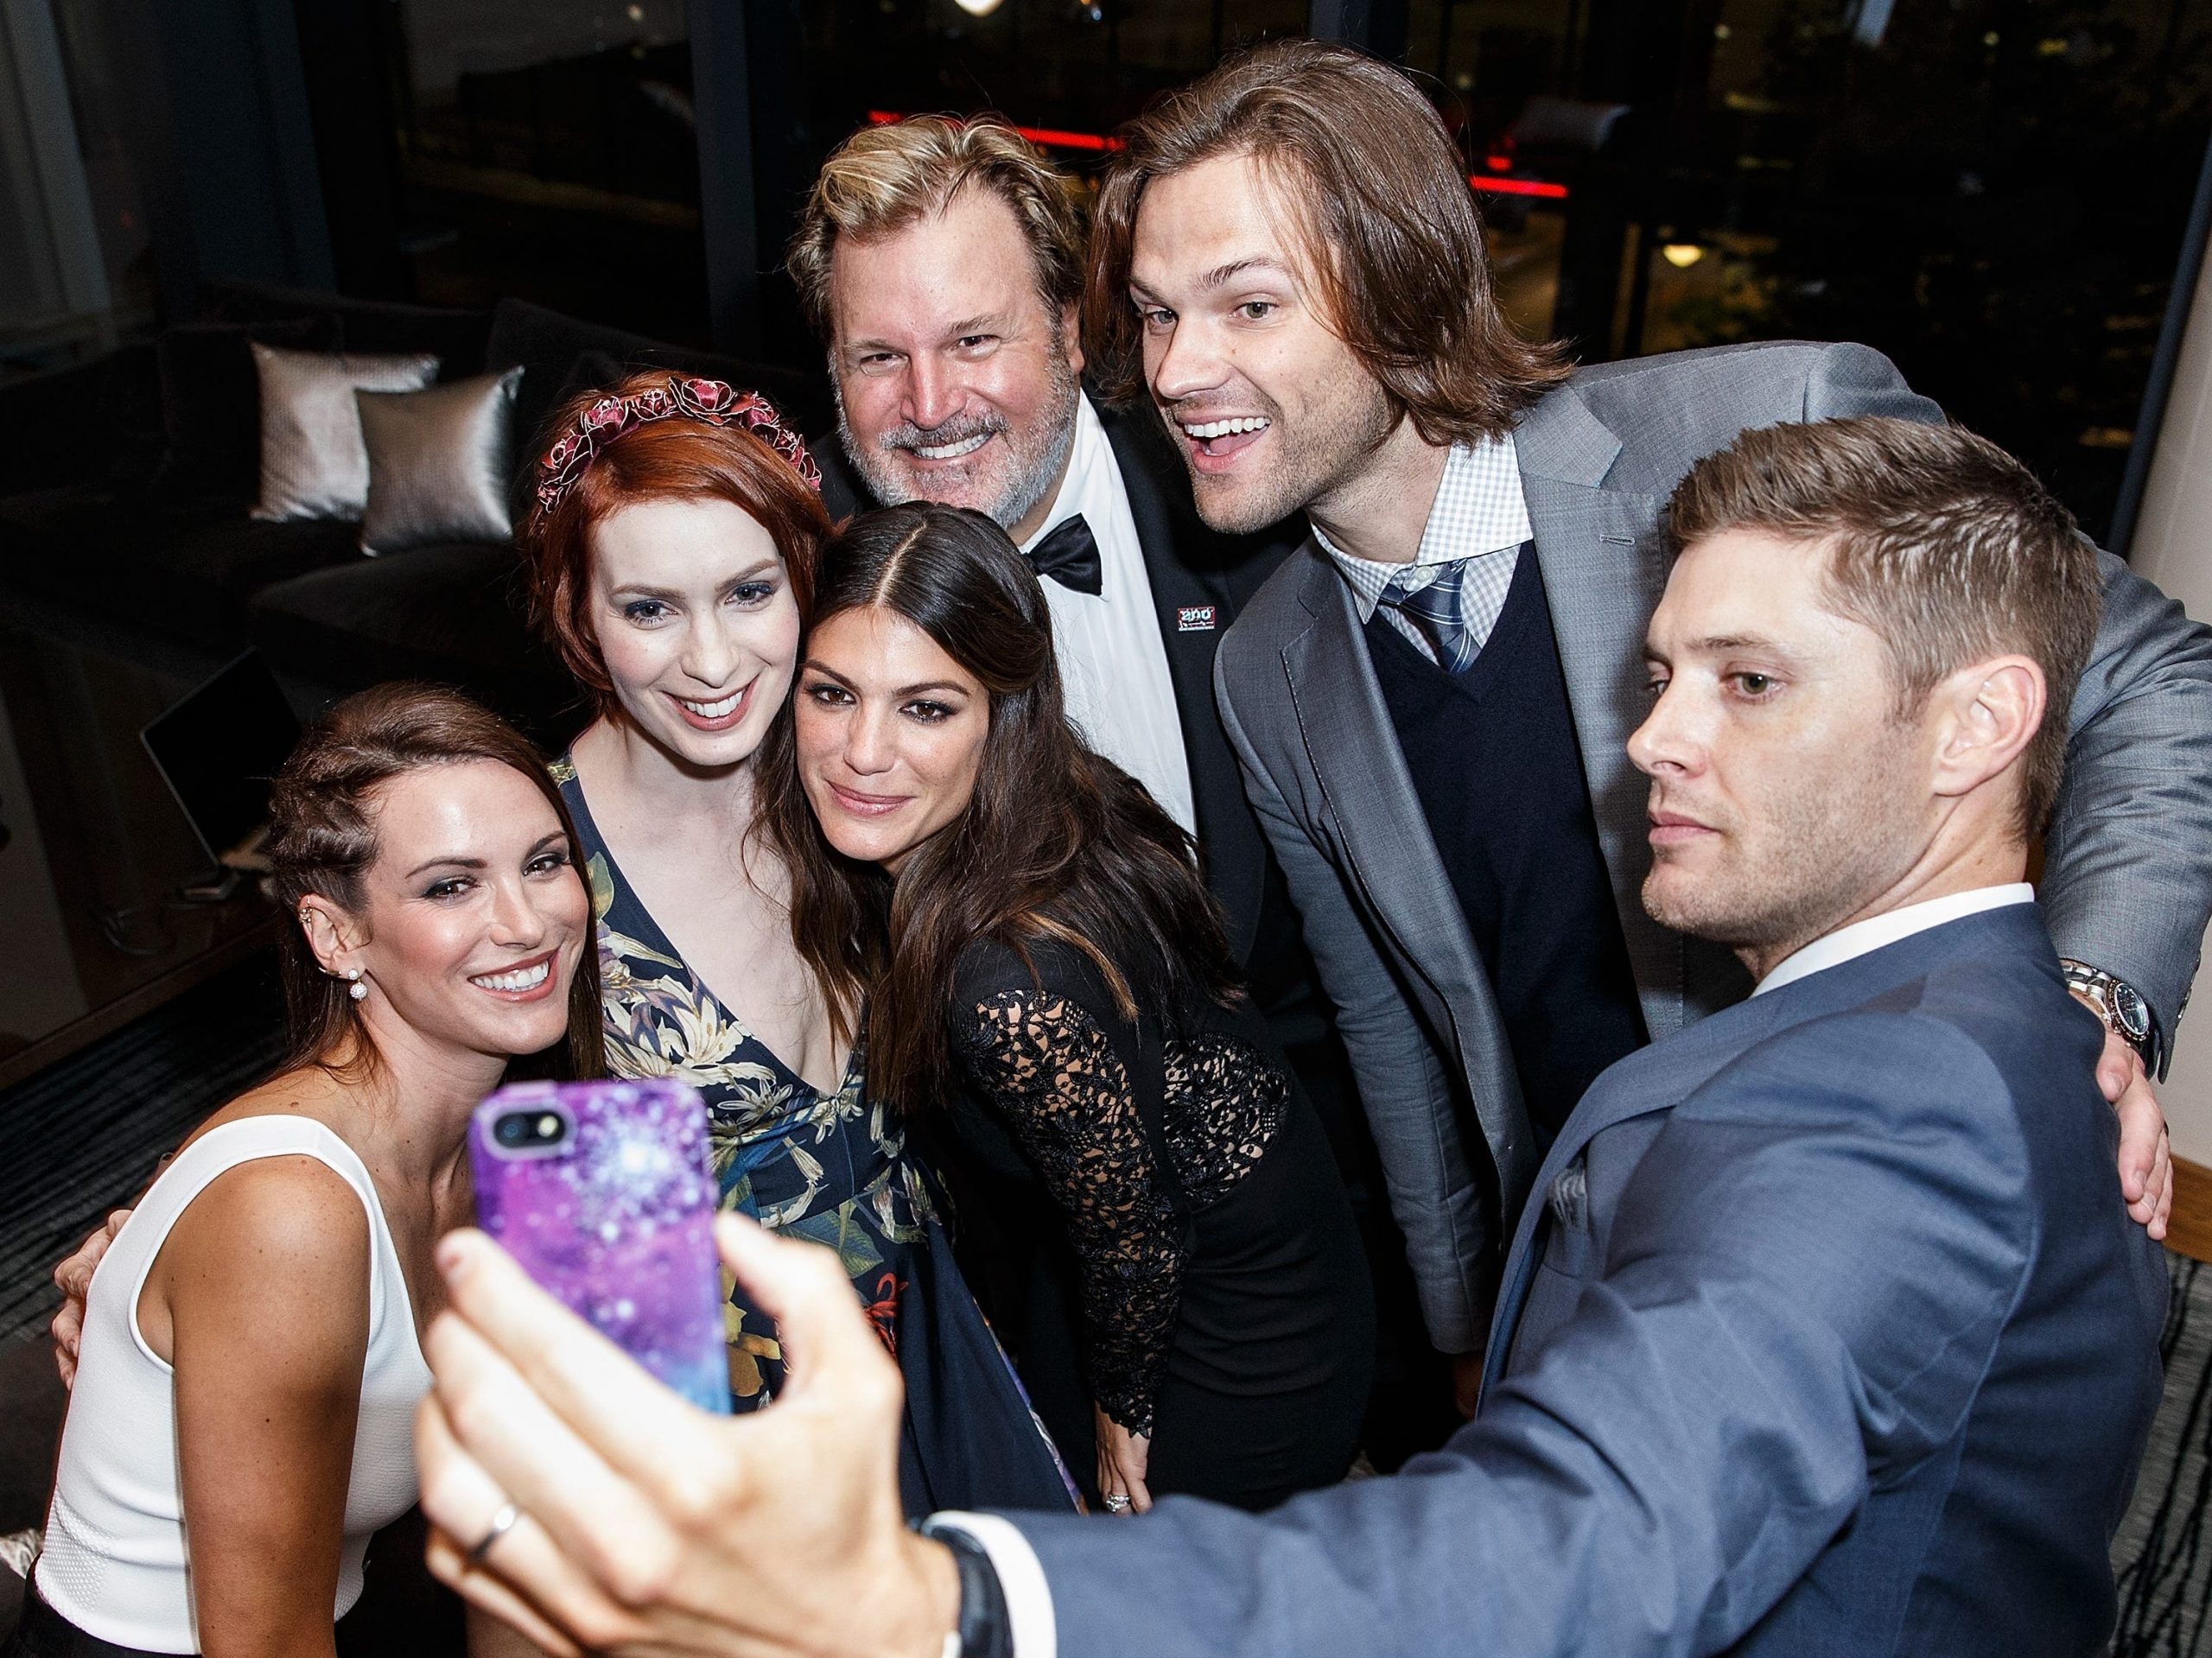 Actress Danneel Ackles, Actress Felicia Day, Actress Genevieve Padalecki, Producer Jim Michaels, Actor Jared Padalecki and Actor Jensen Ackles take a selfie at the 200th episode of 'Supernatural' party at Fairmont Pacific Rim Hotel on October 18, 2014 in Vancouver, Canada.